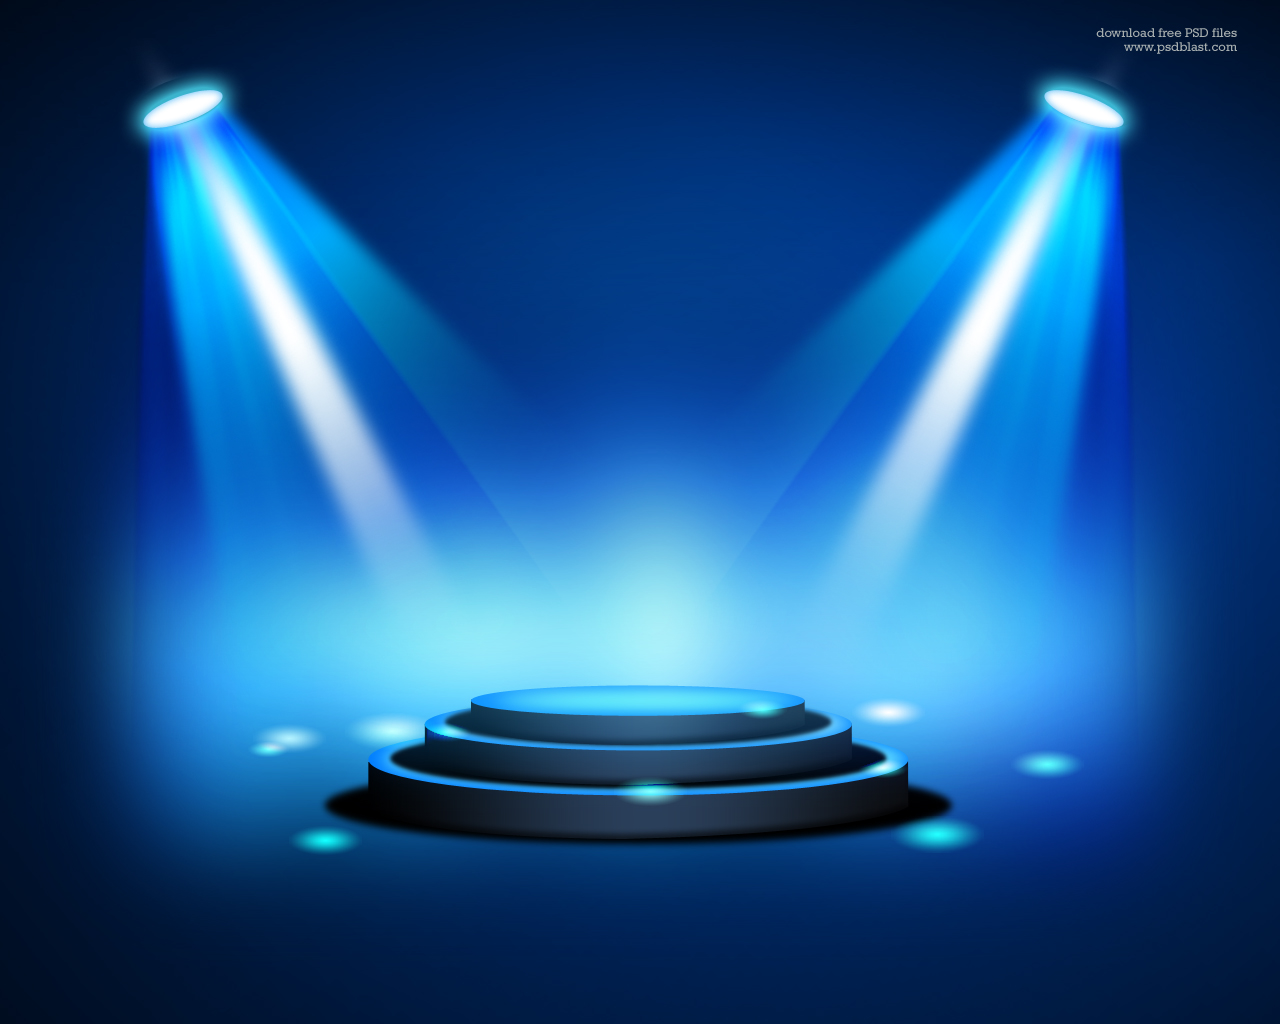 Stage Lighting Background with Spot Light Effects PSD Psdblast